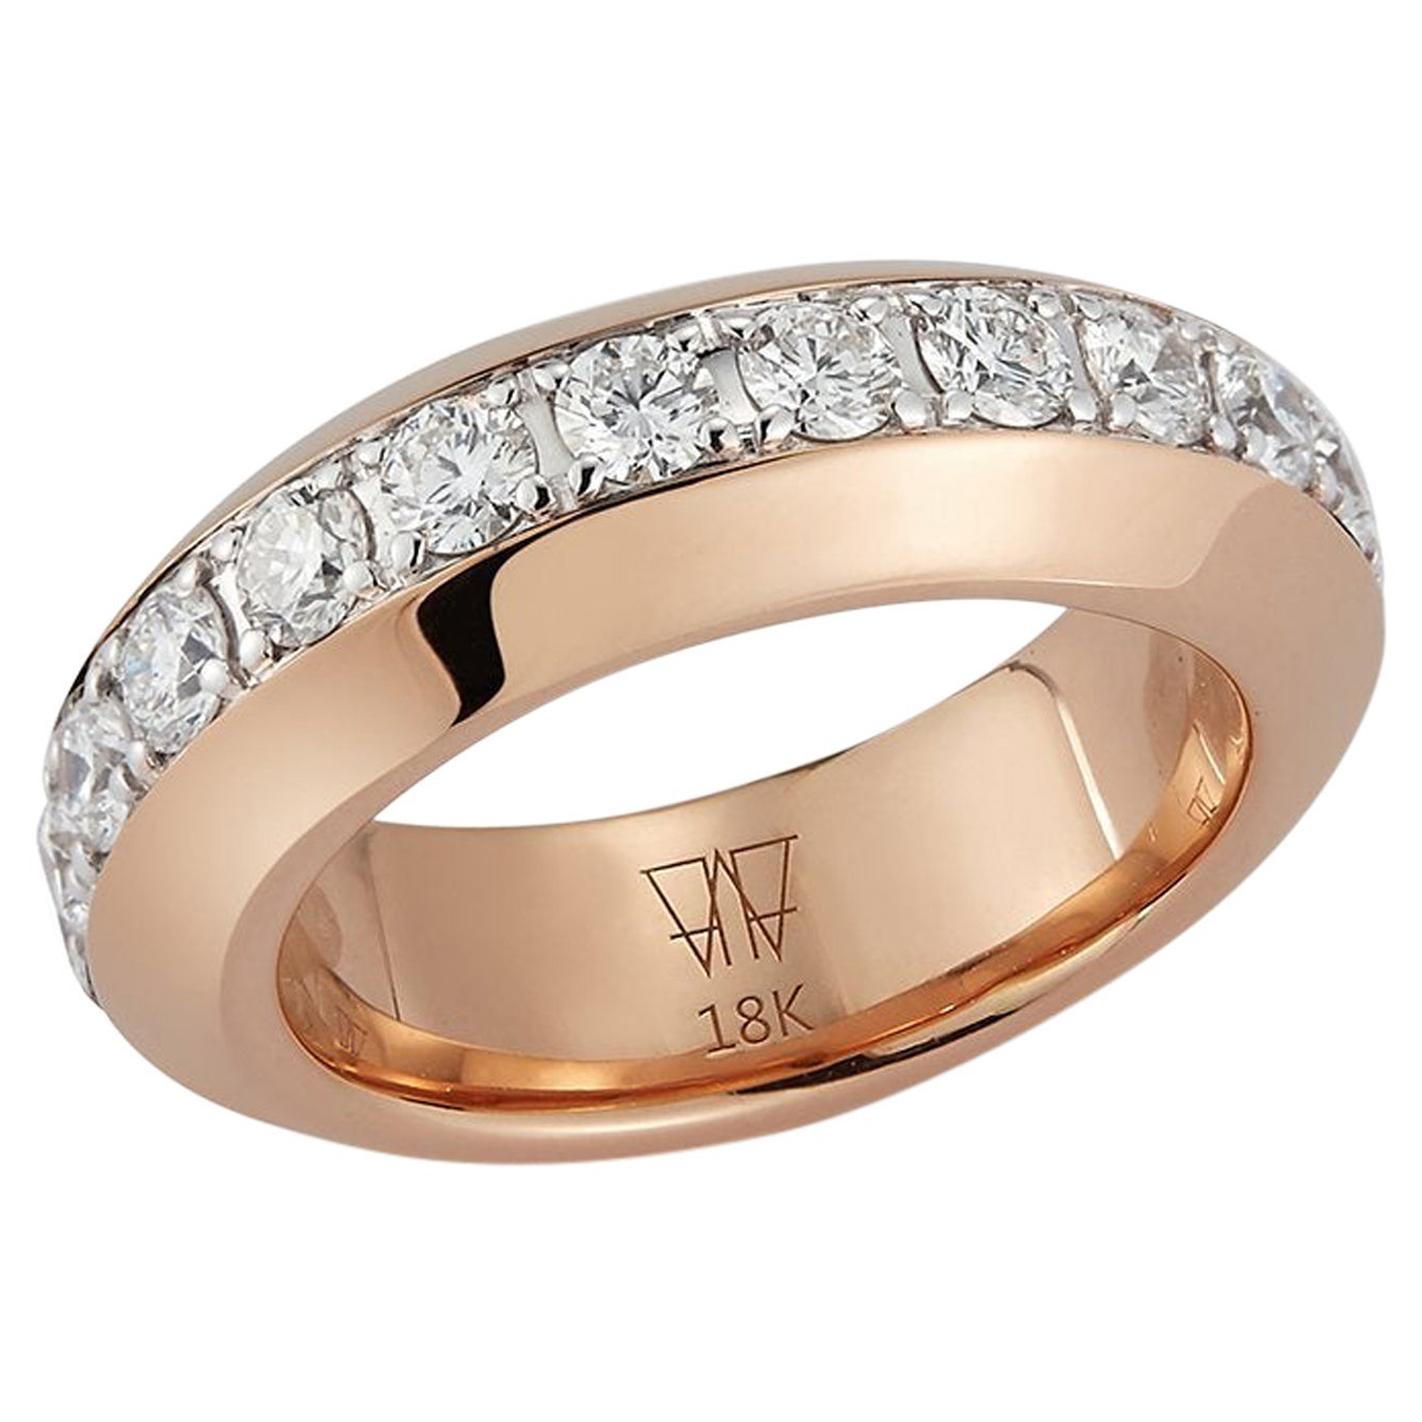 For Sale:  Walters Faith 18K Rose Gold and White Diamond Angled Band Ring